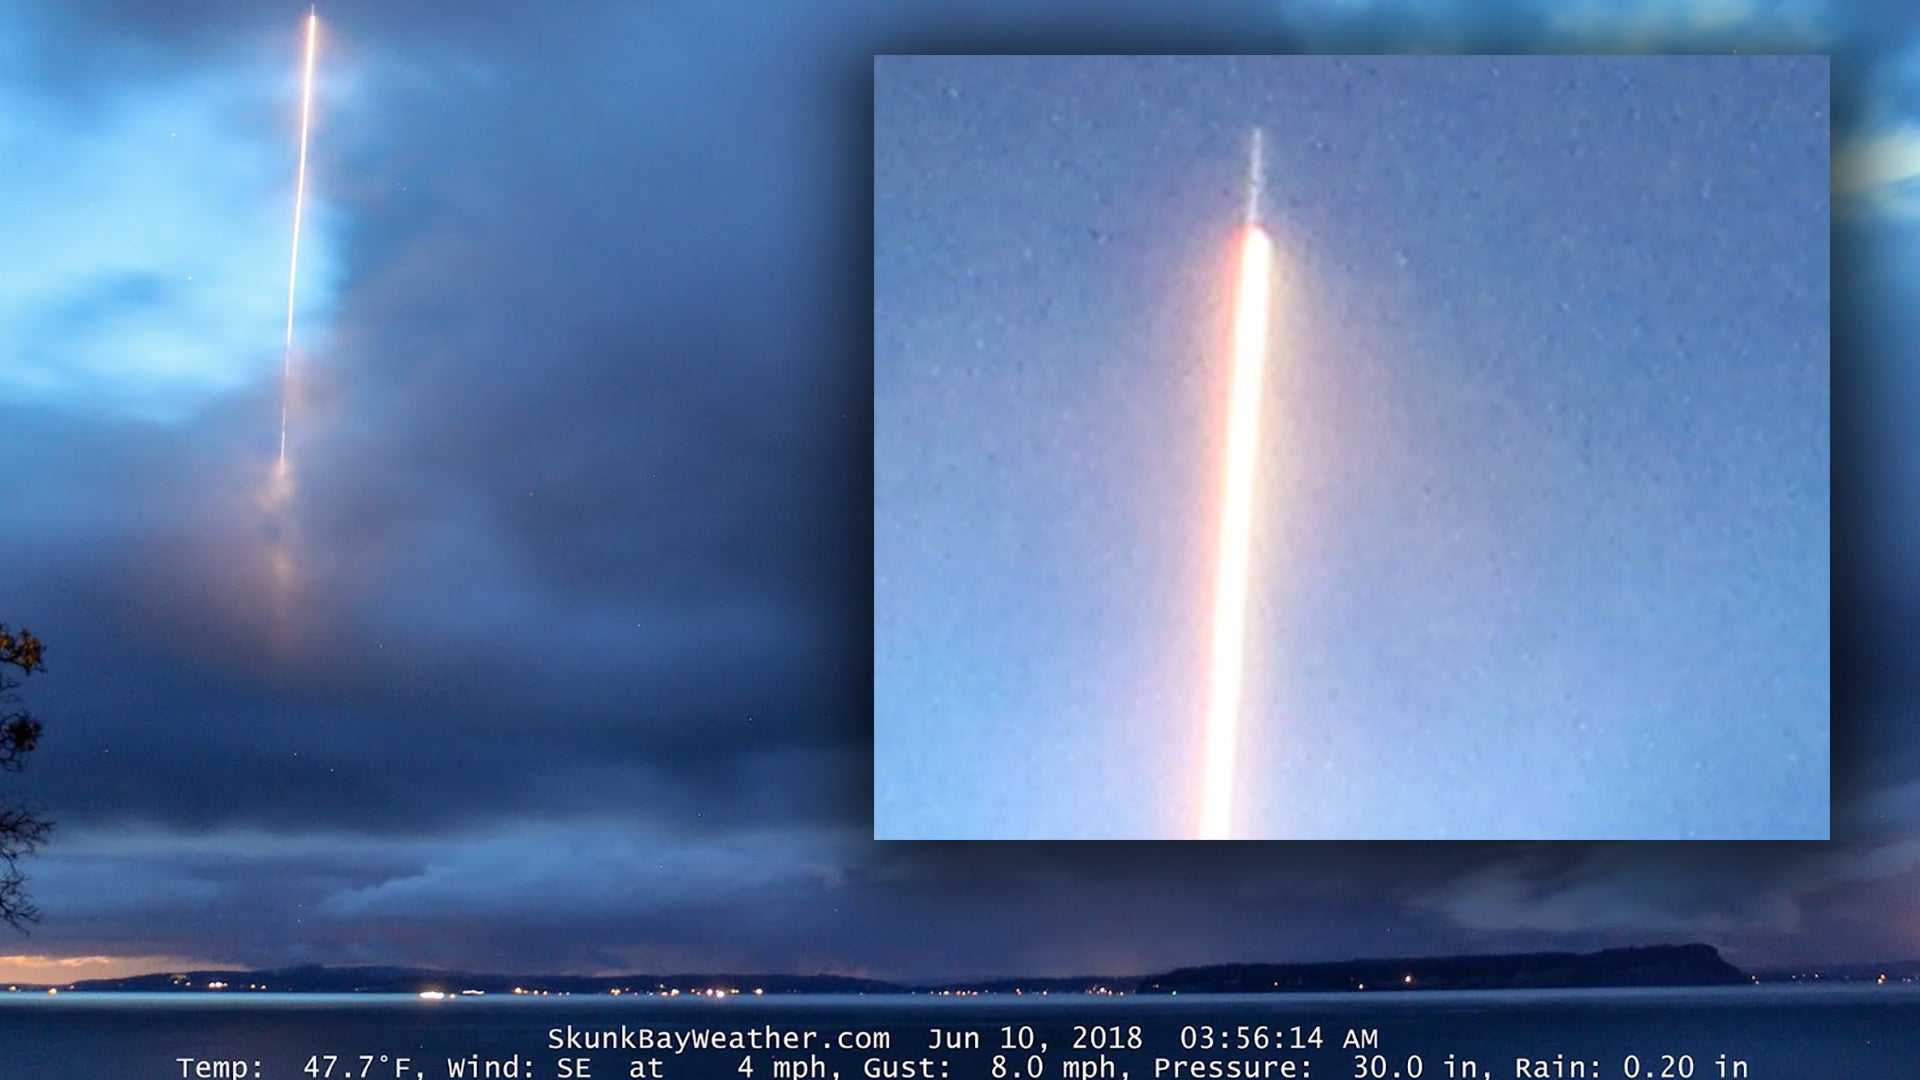 Let's Talk About That Mysterious 'Rocket Launch Over Whidbey Island' Photo (Updated)